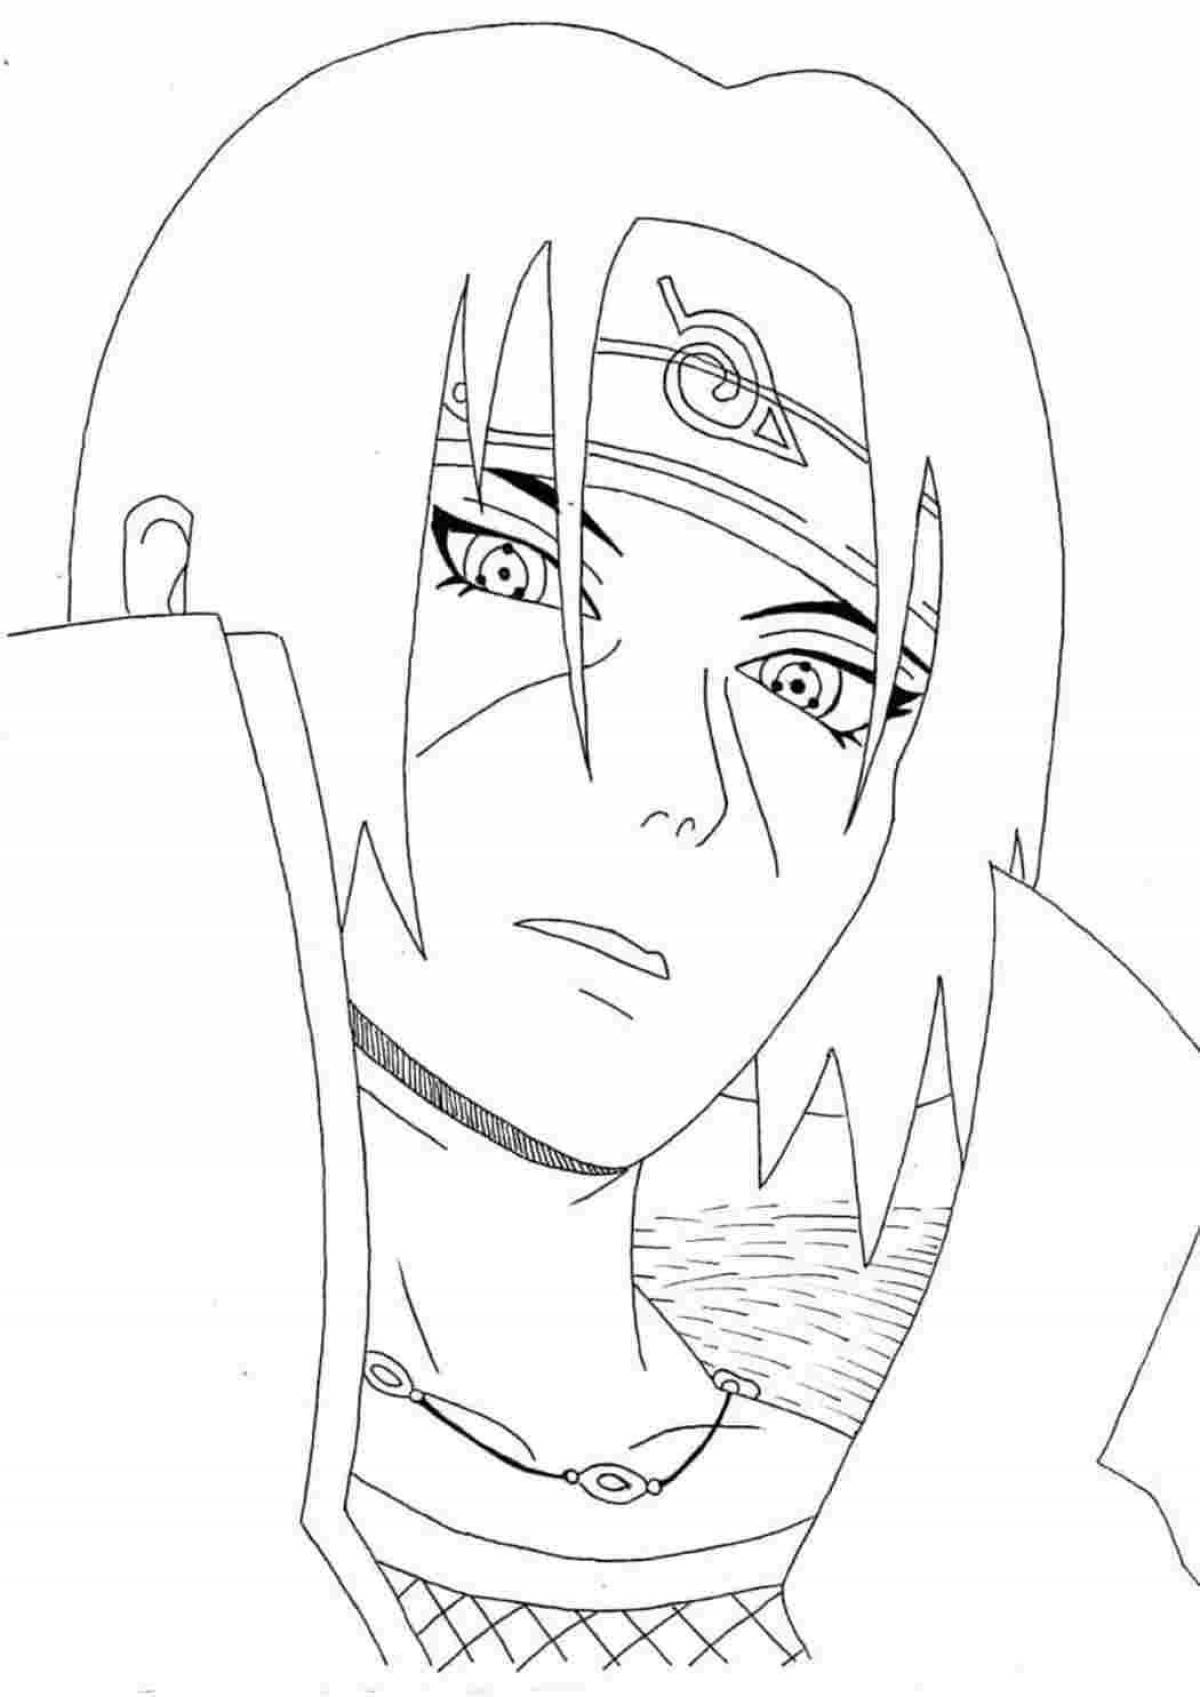 Itachi animated coloring page